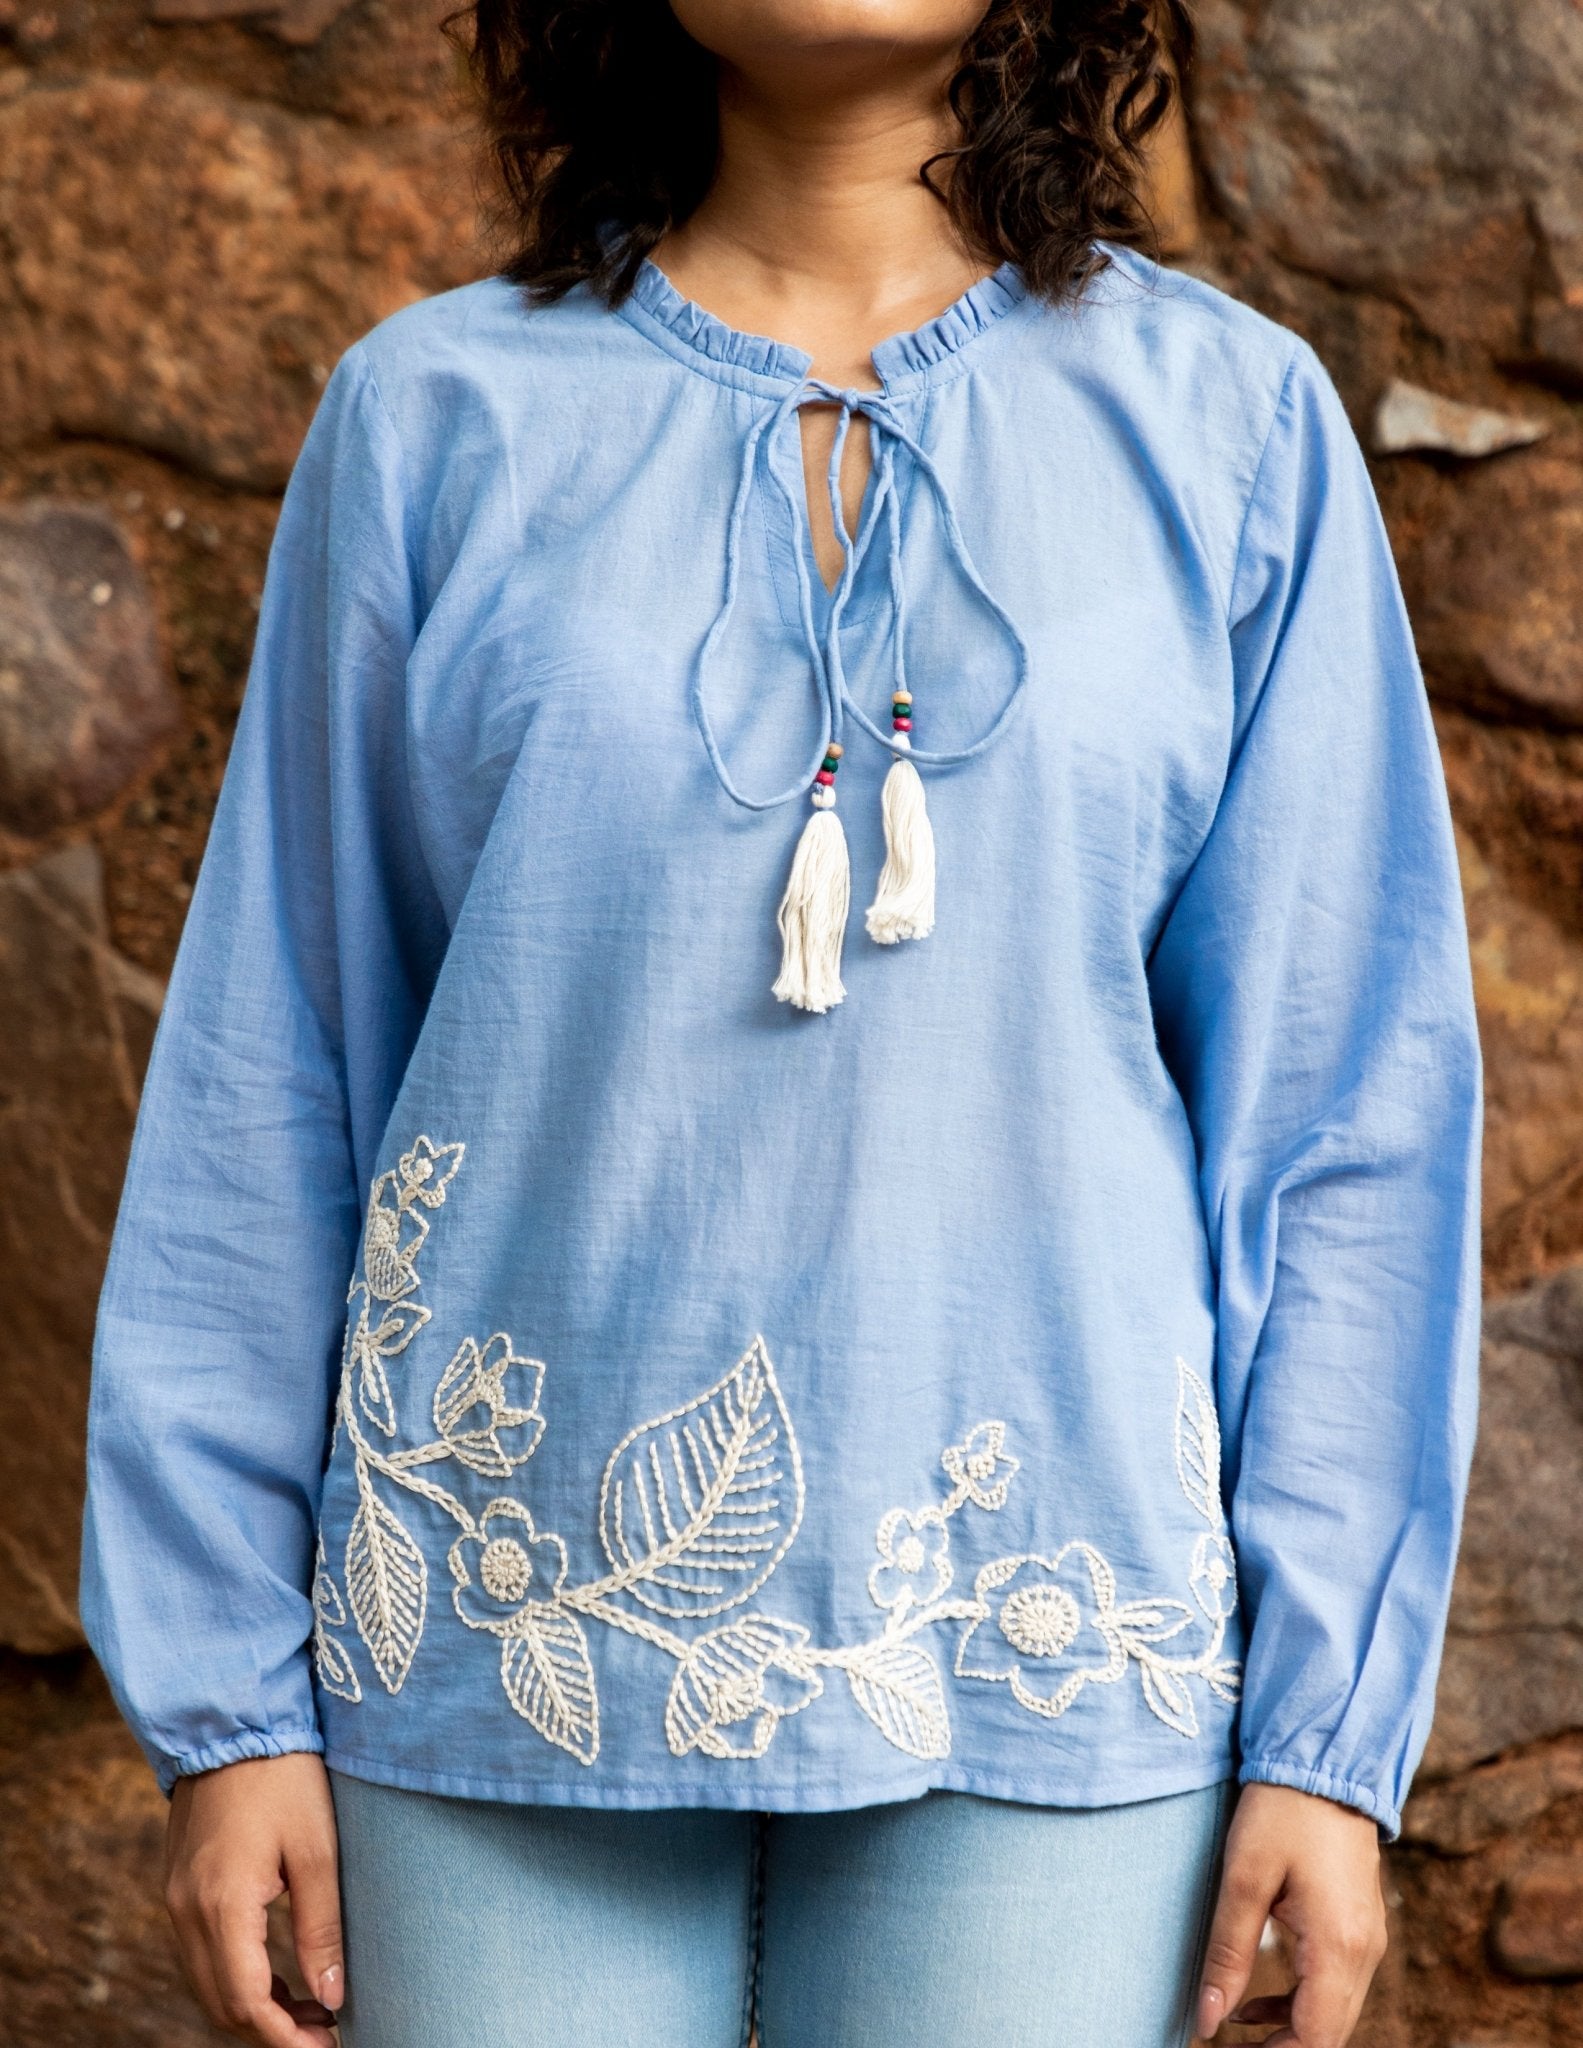 Nature Inspired Hand Embroidered Tunic Top in Handloom Cotton - Spin Wheel